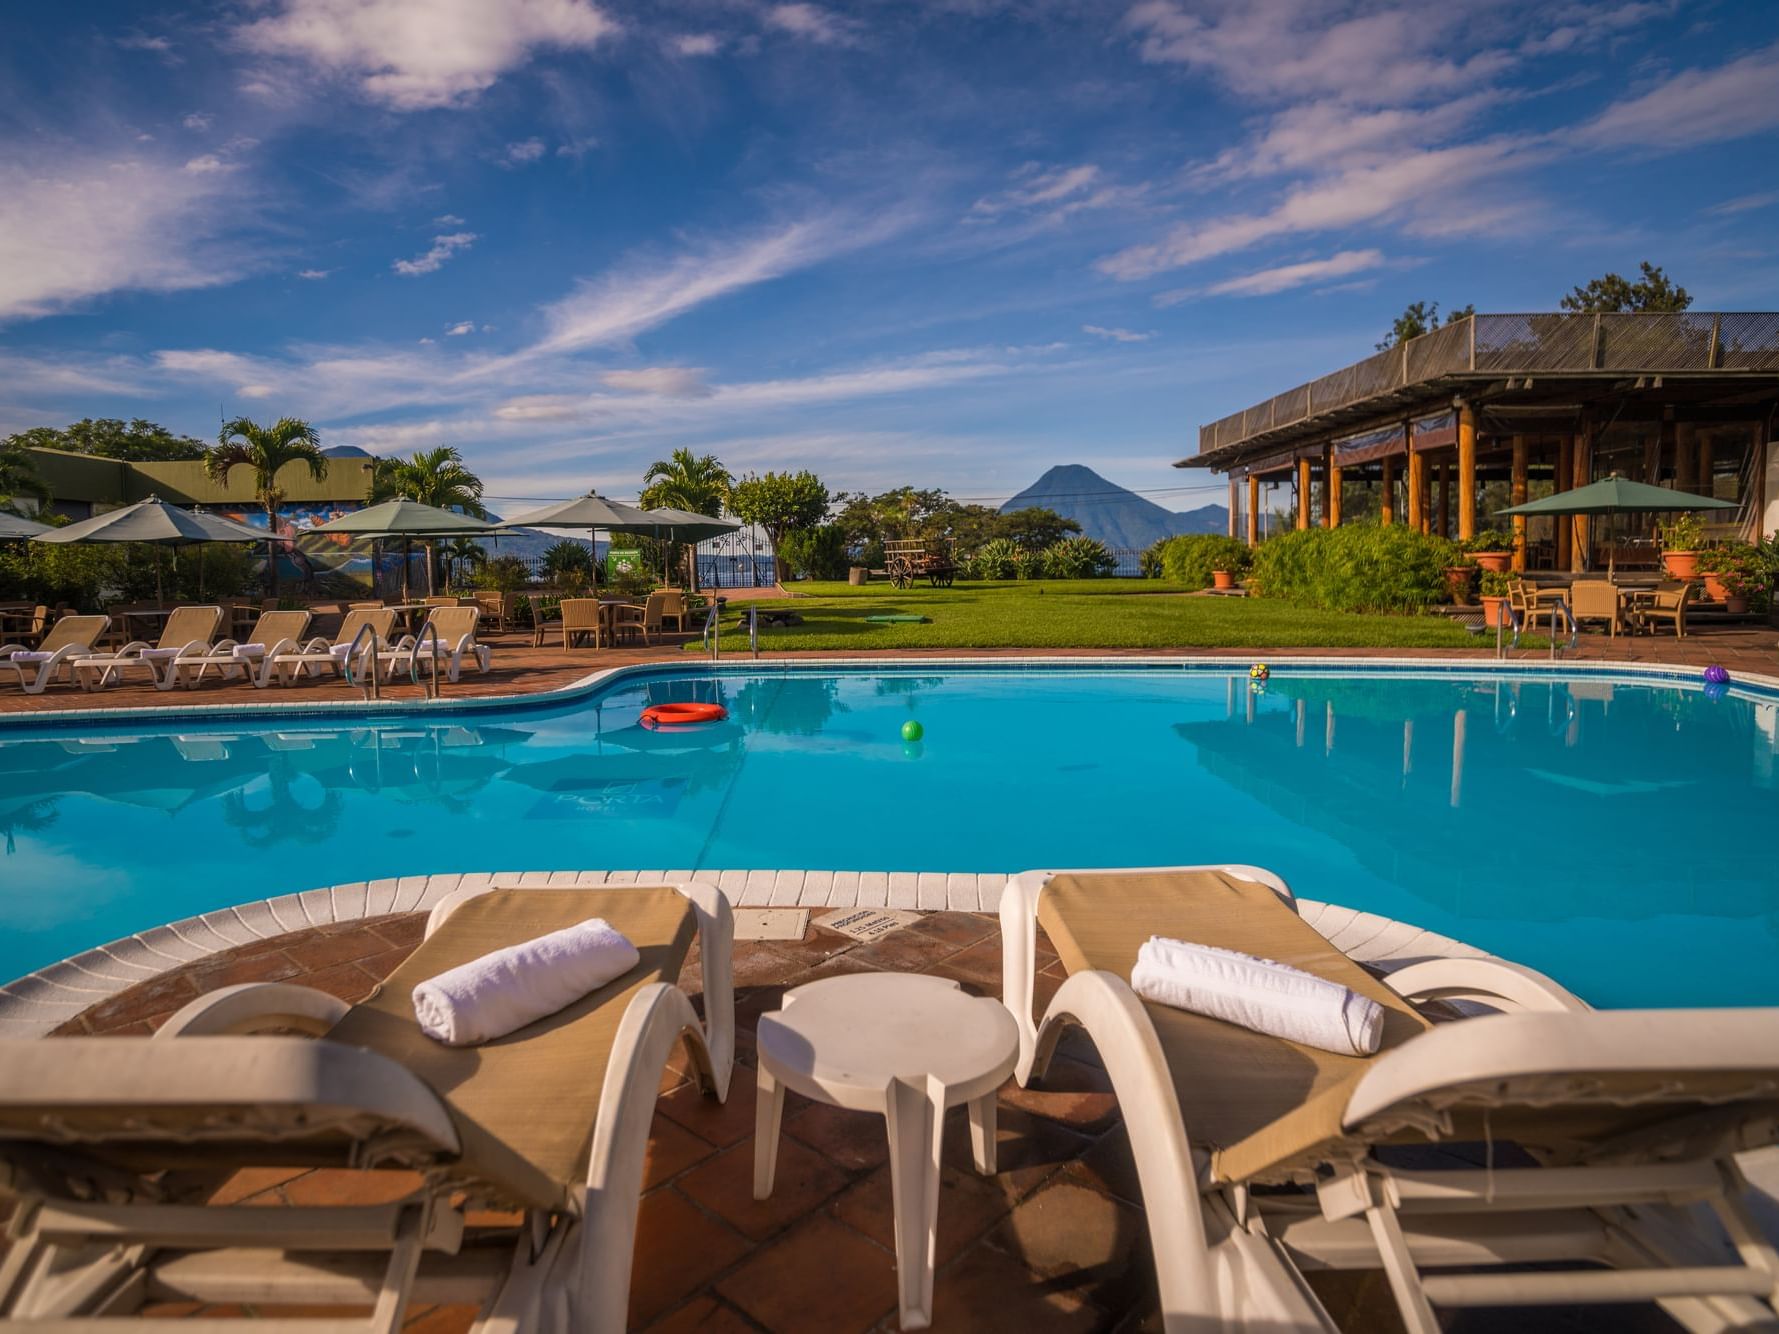 Relaxing lounge area by the outdoor pool overlooking the mountains at Porta Hotel del Lago